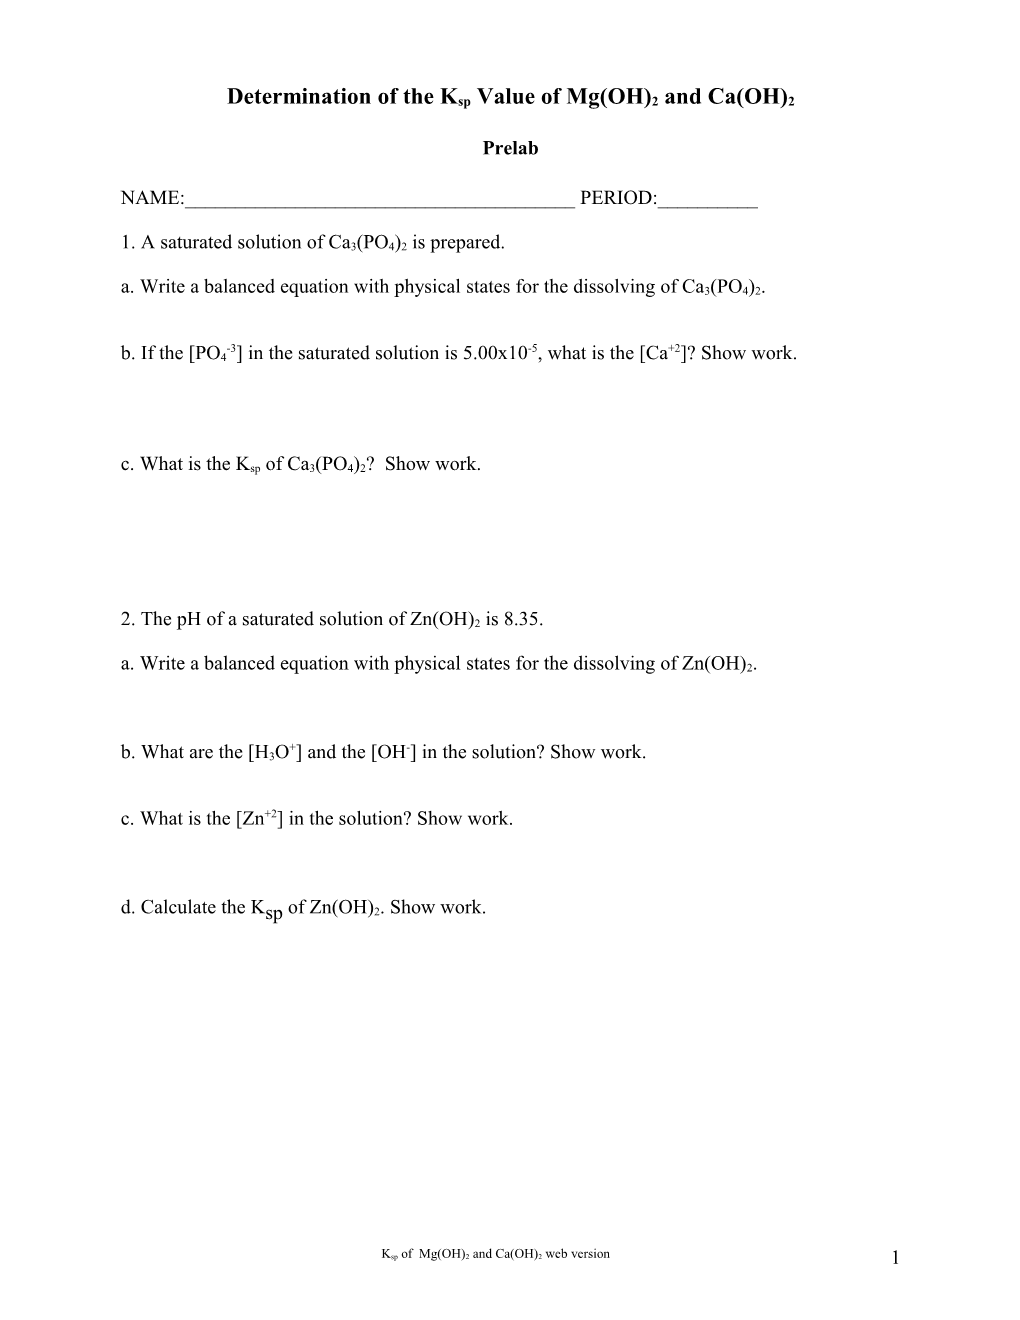 Determination of the Ksp Value of Mg(OH)2 and Ca(OH)2